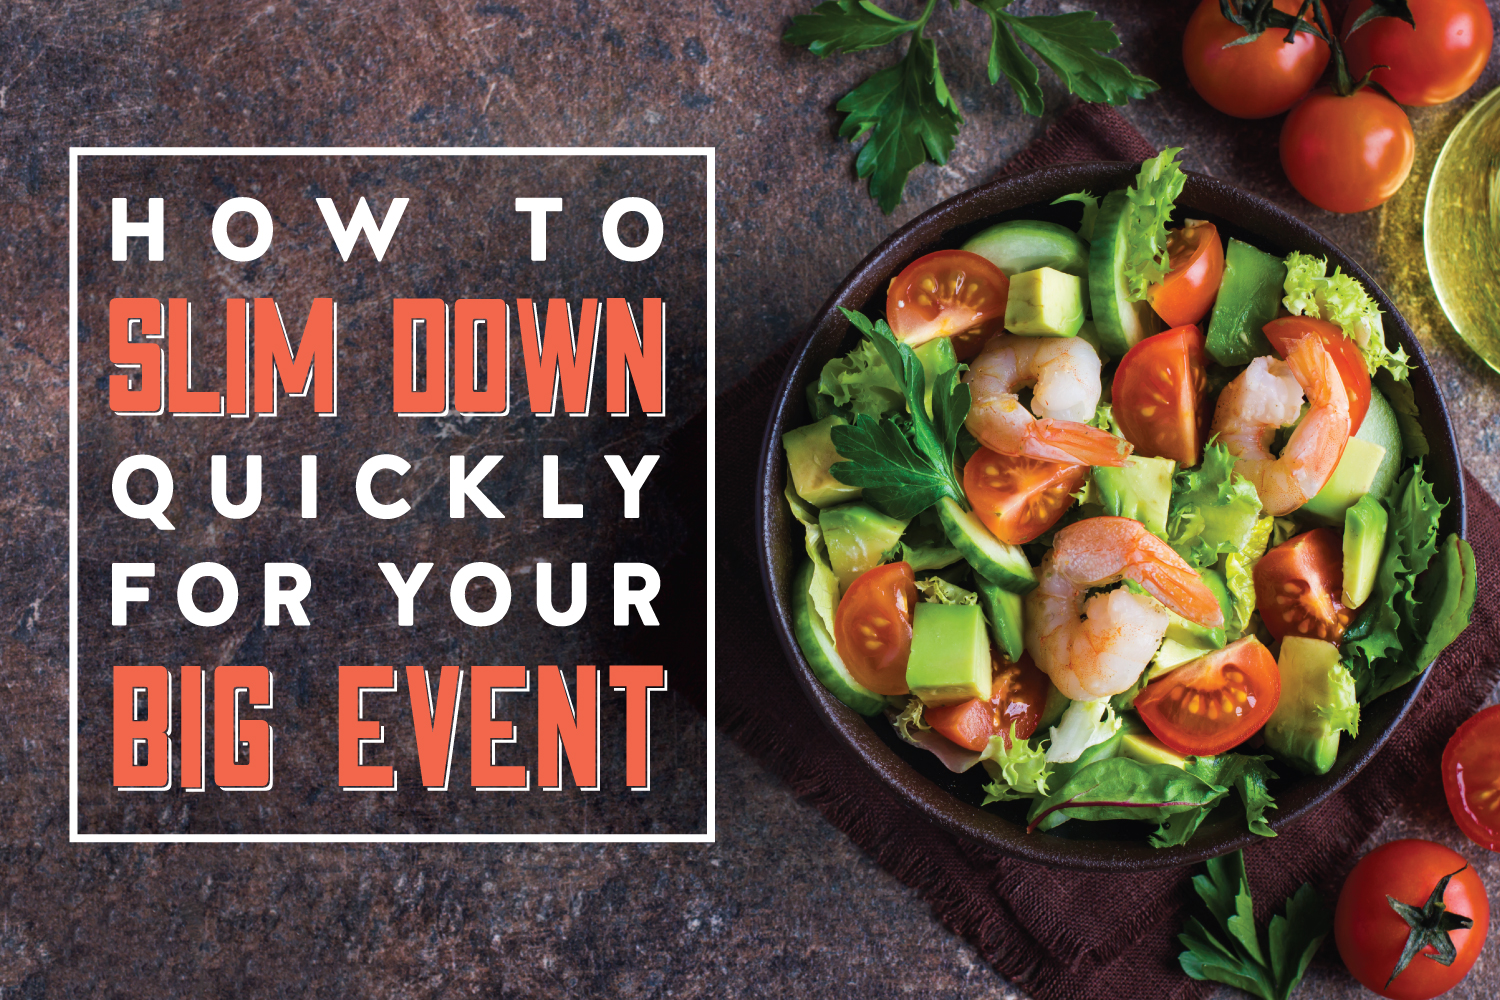 How to Slim Down Quickly for Your Big Event